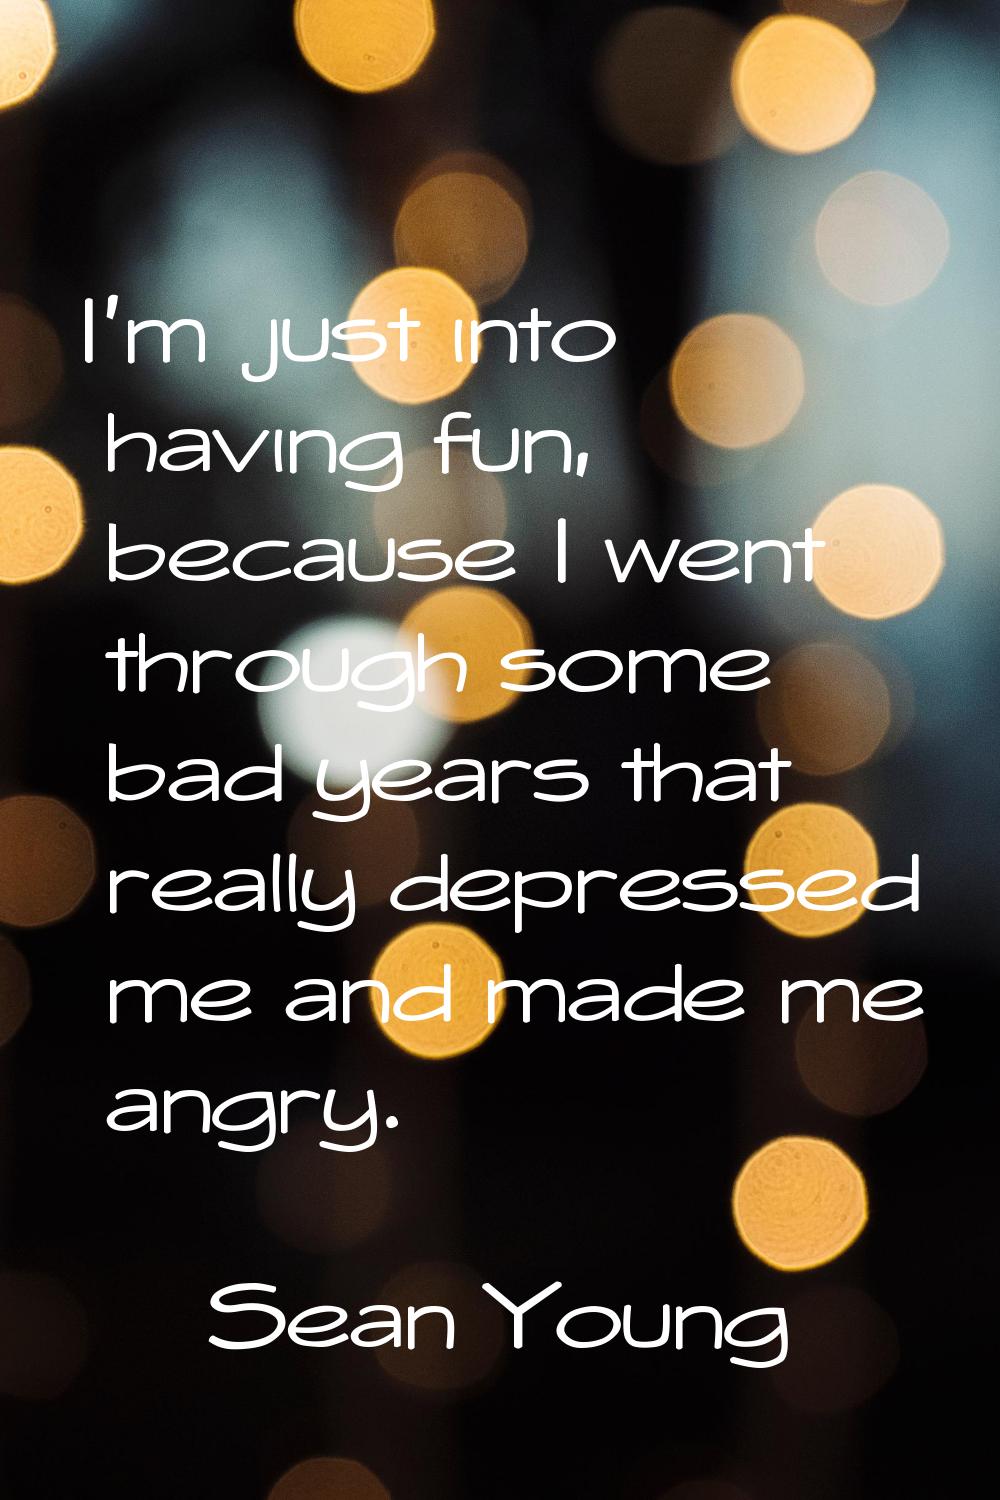 I'm just into having fun, because I went through some bad years that really depressed me and made m